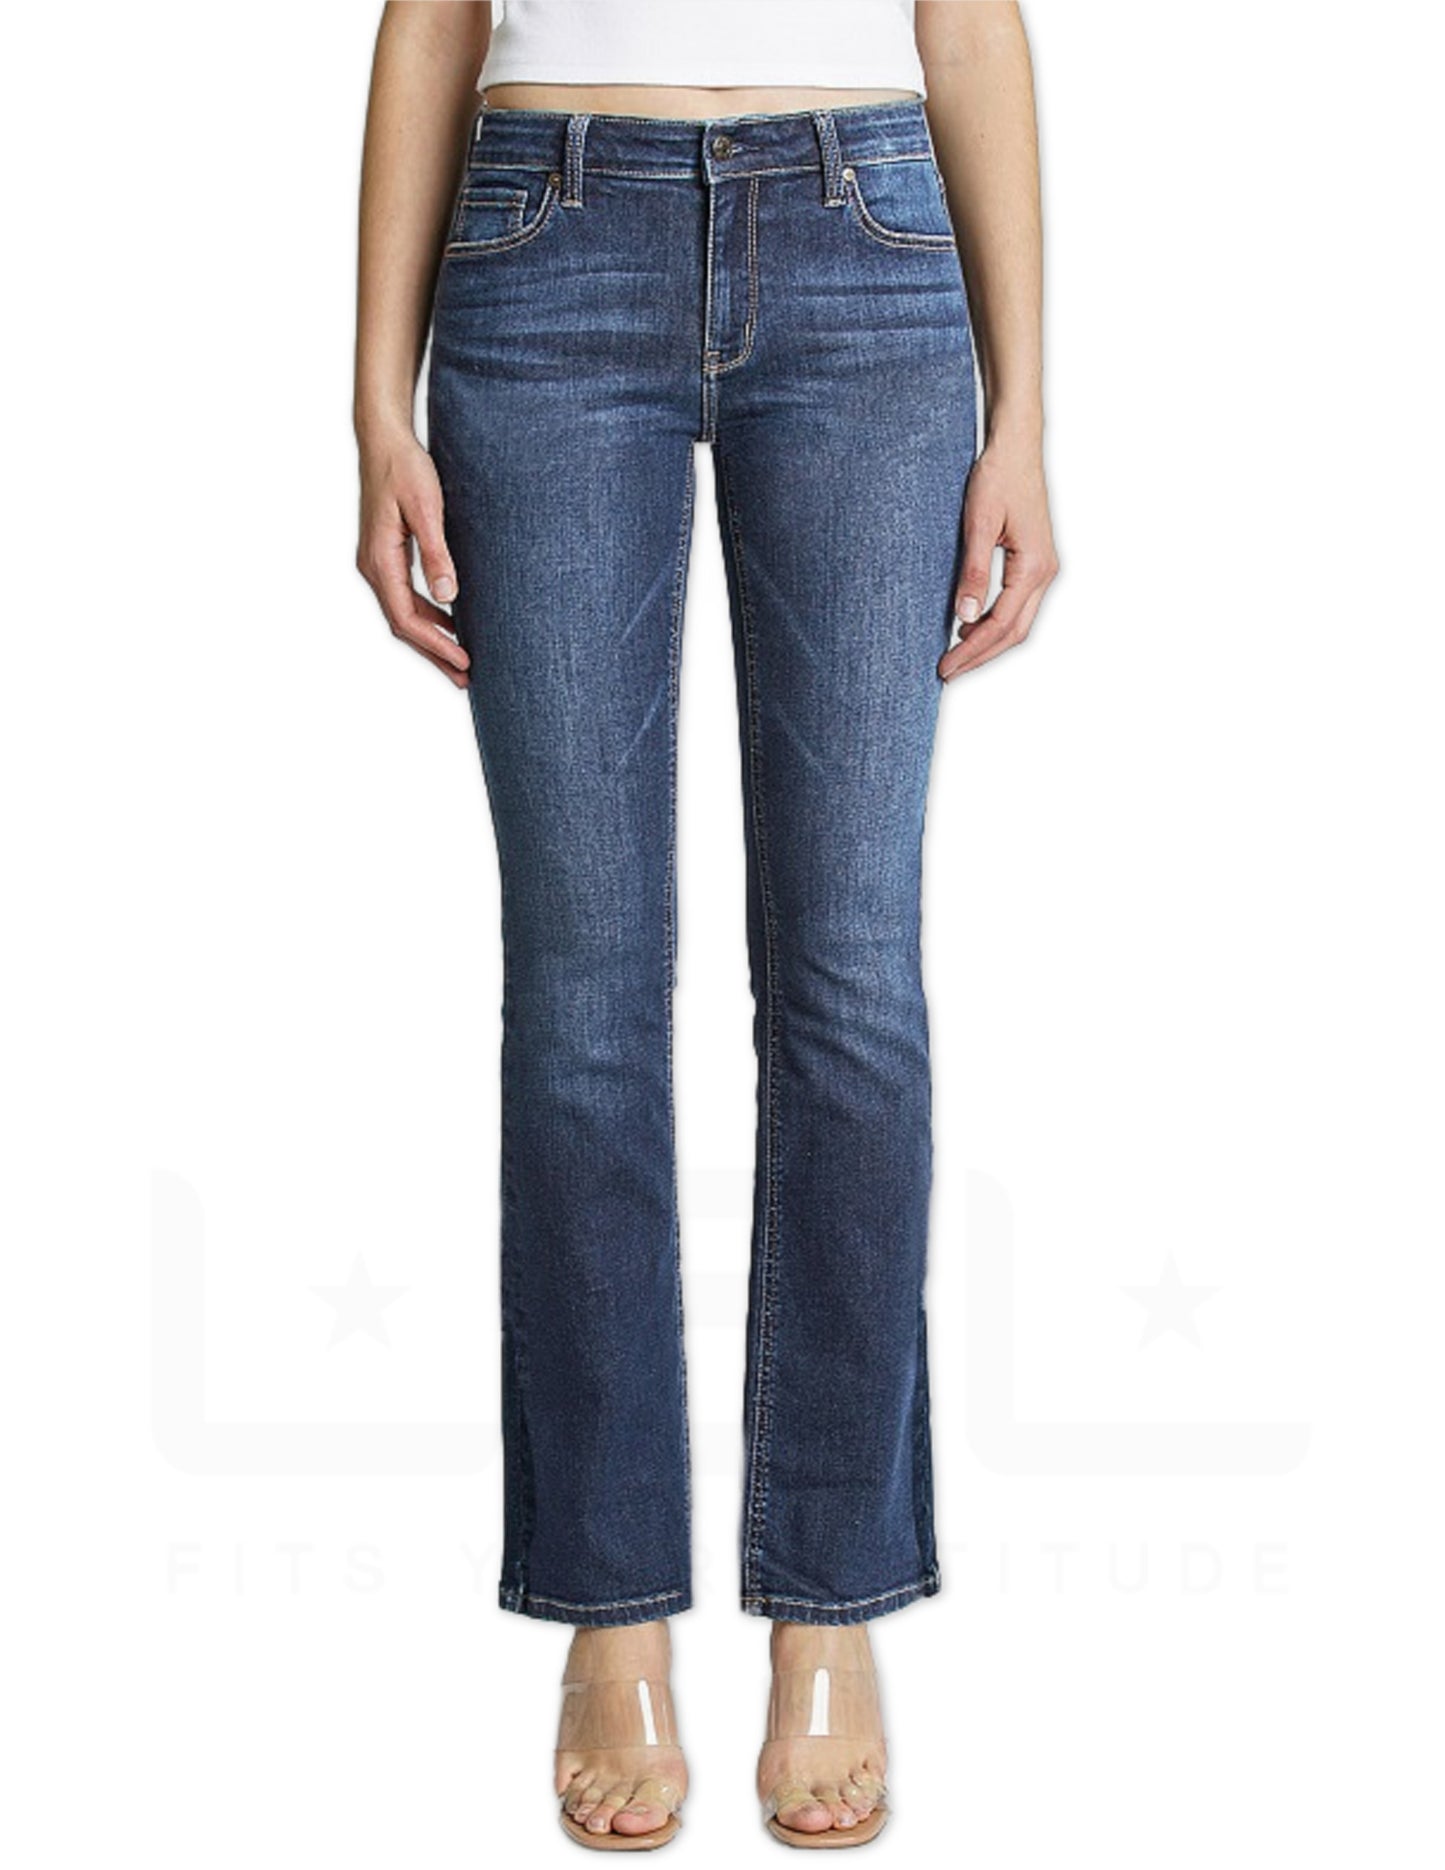 Imogen Mid Rise Bootcut Jeans